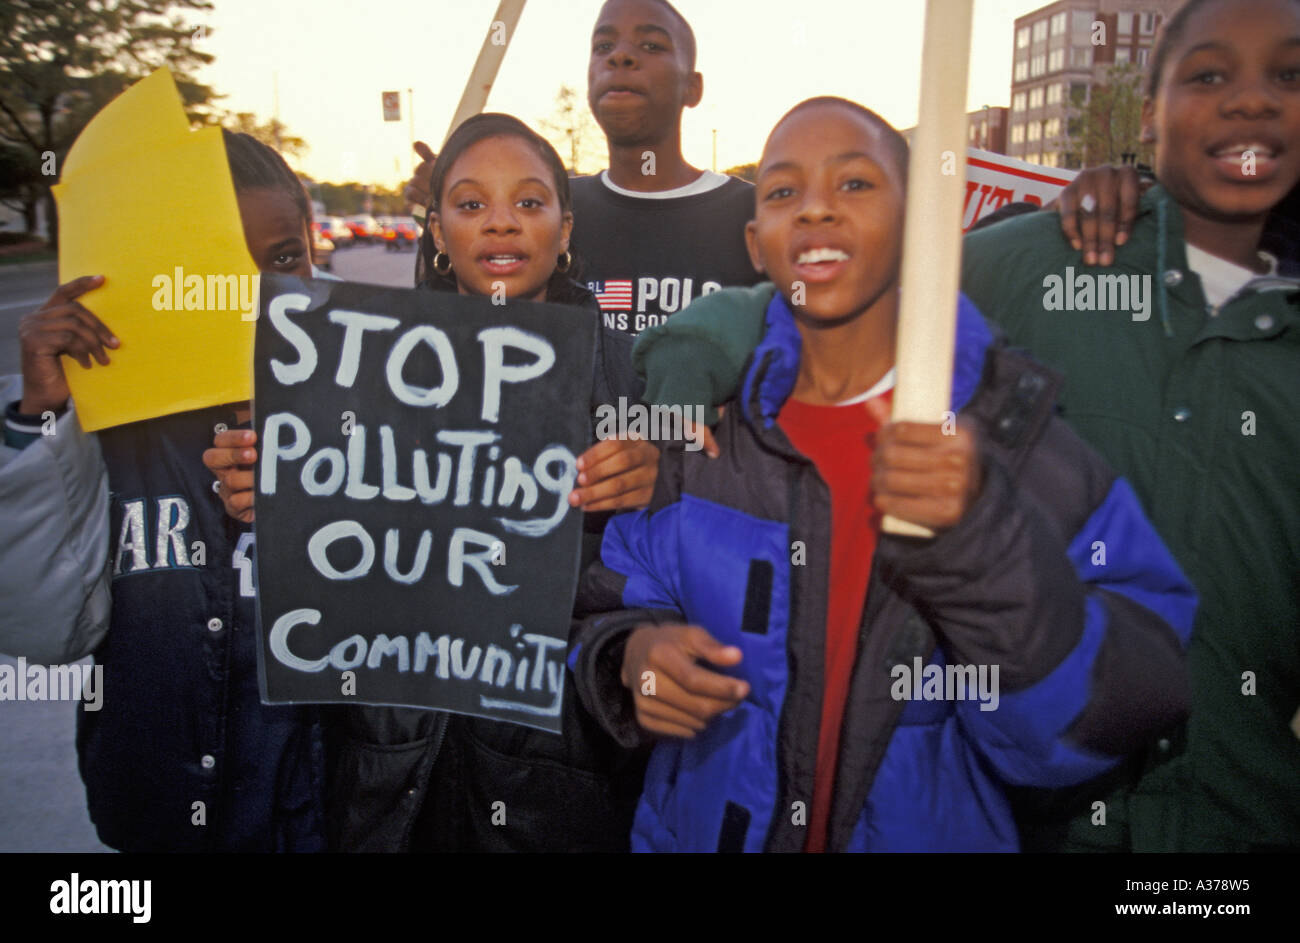 Pollution Protest Stock Photo